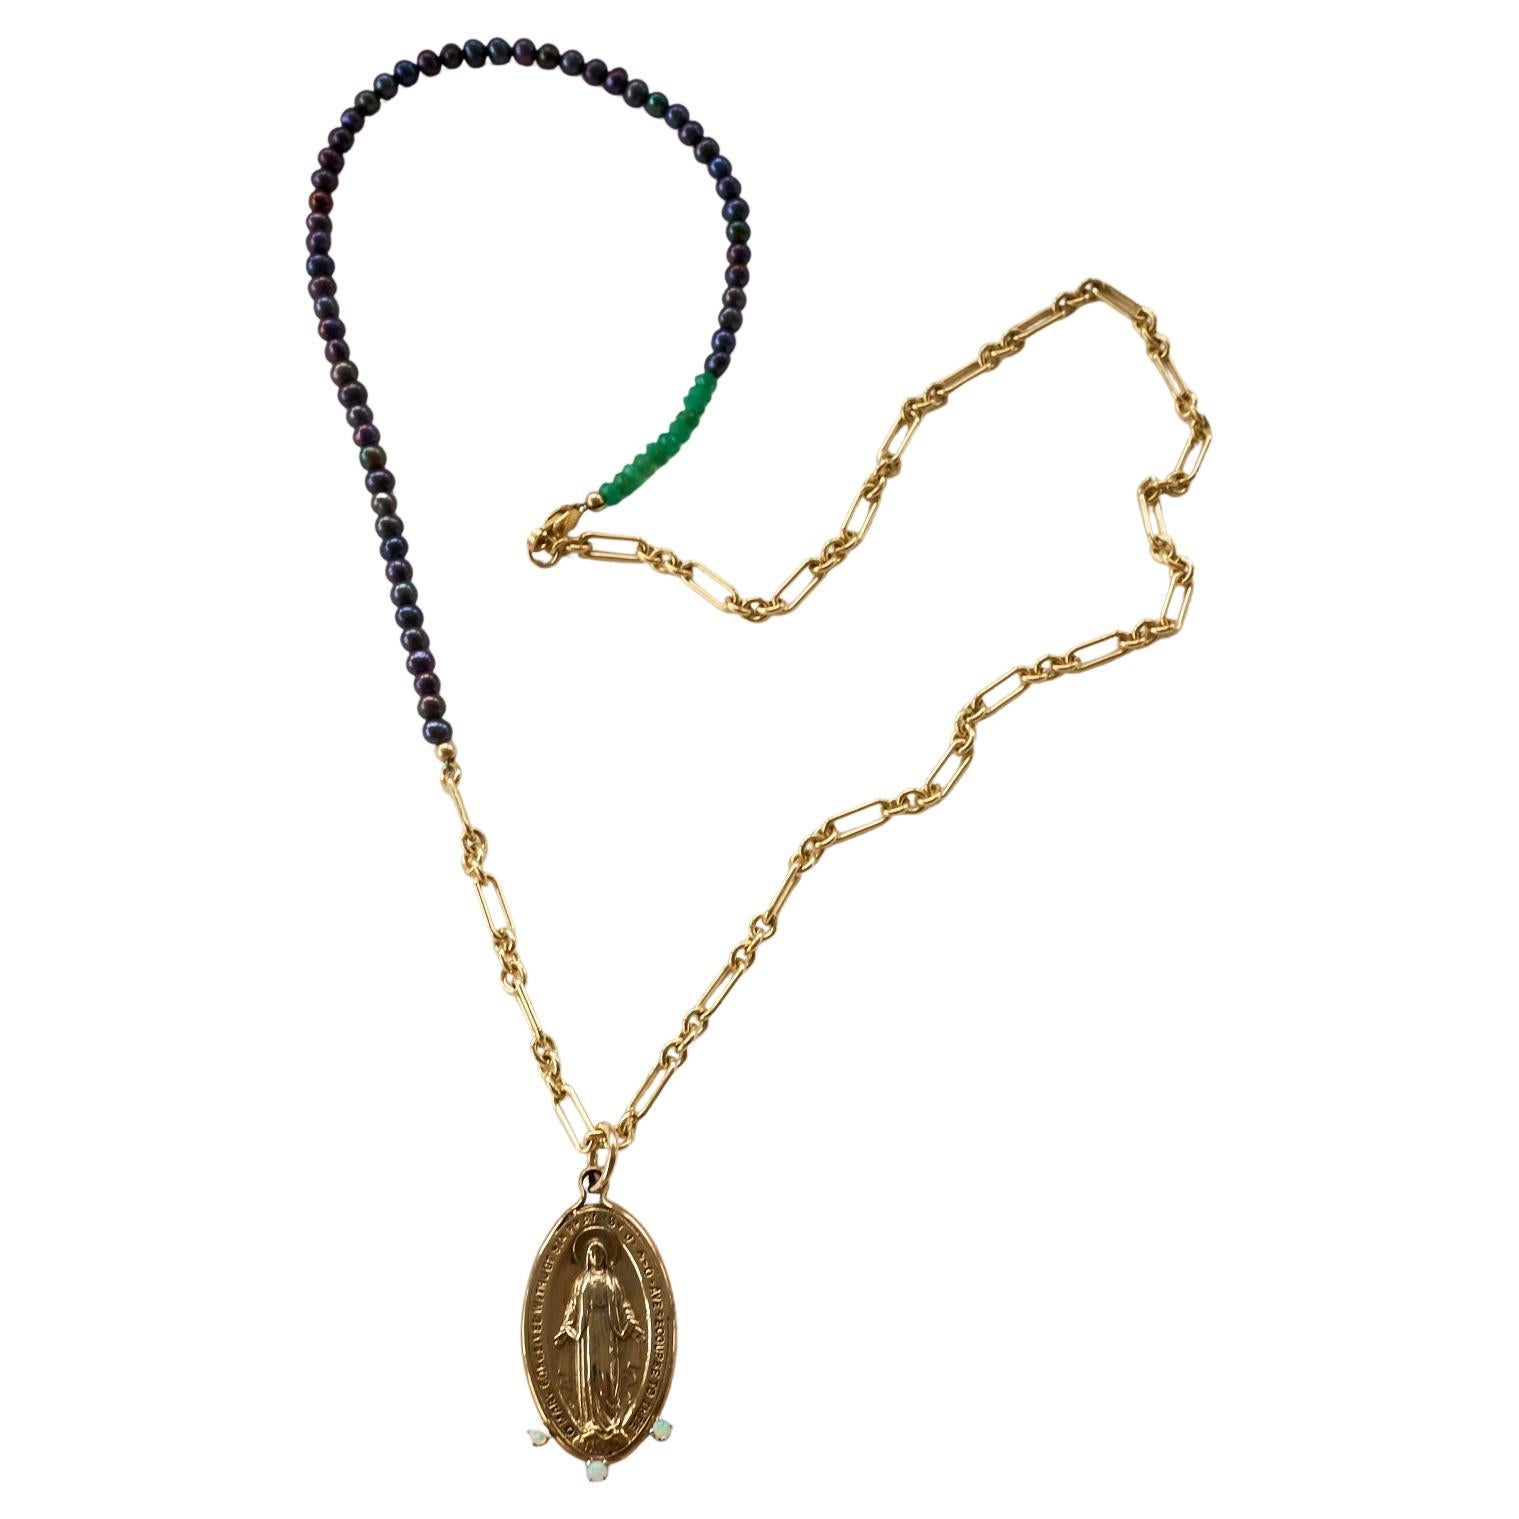 Virgin Mary Opal Prong Set Necklace Gold-Filled Chain Black Pearl Bead For Sale